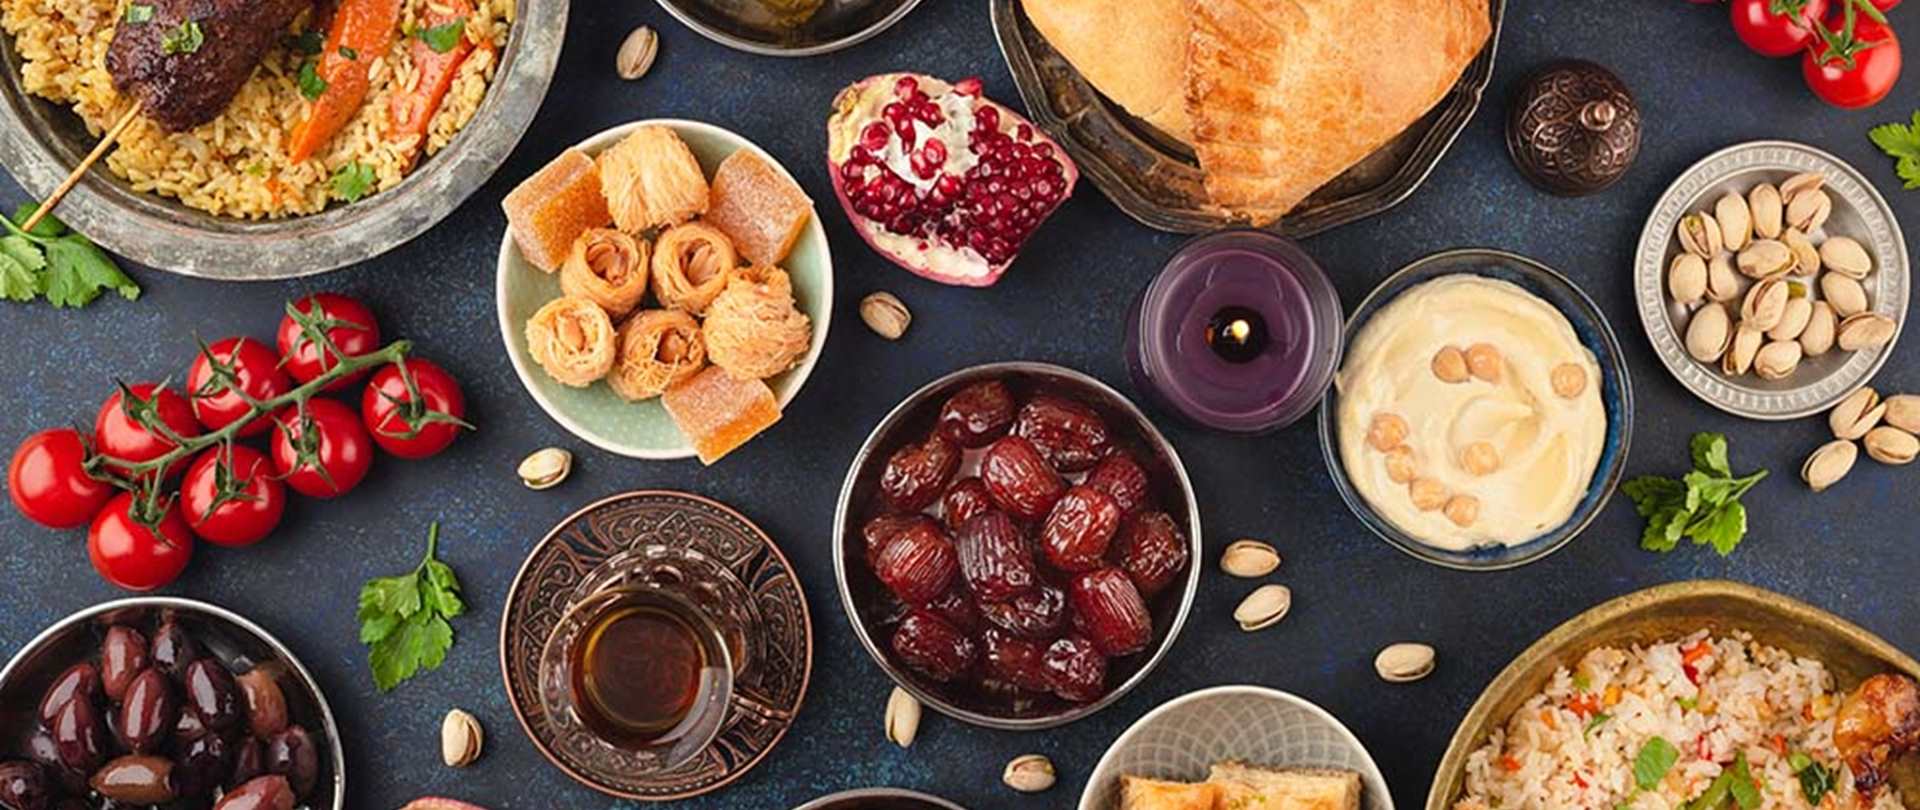 A mixture of foods to be enjoyed on Ramadan